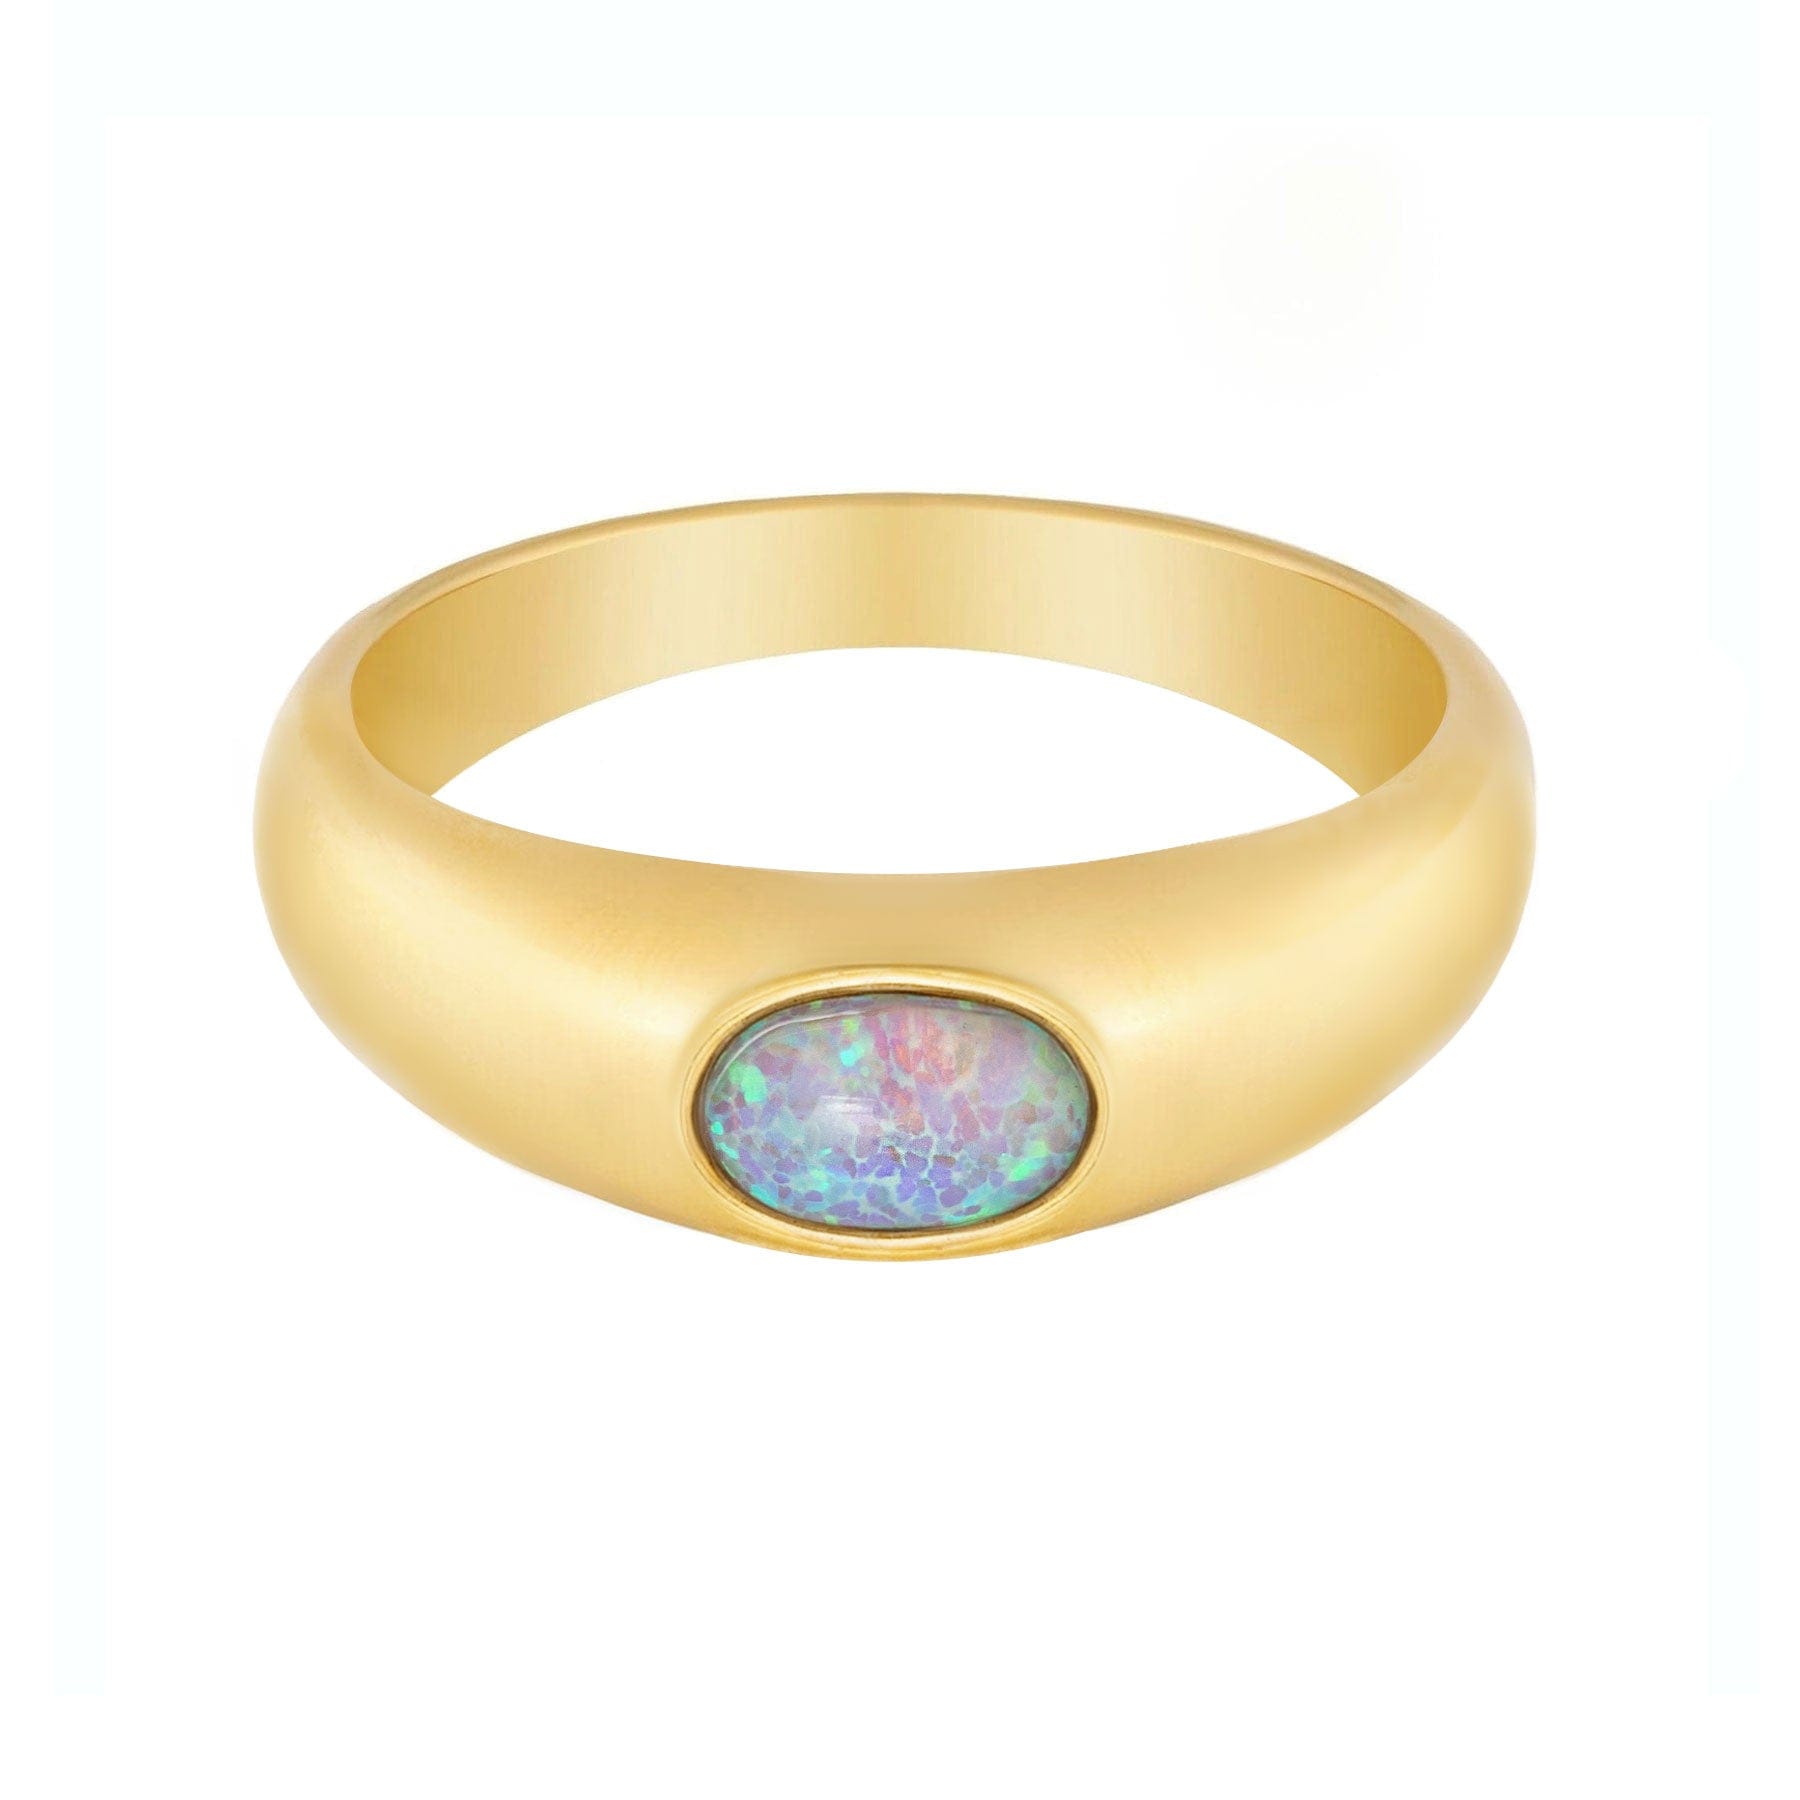 BohoMoon Stainless Steel Aisha Opal Ring Gold / US 6 / UK L / EUR 51 (small)